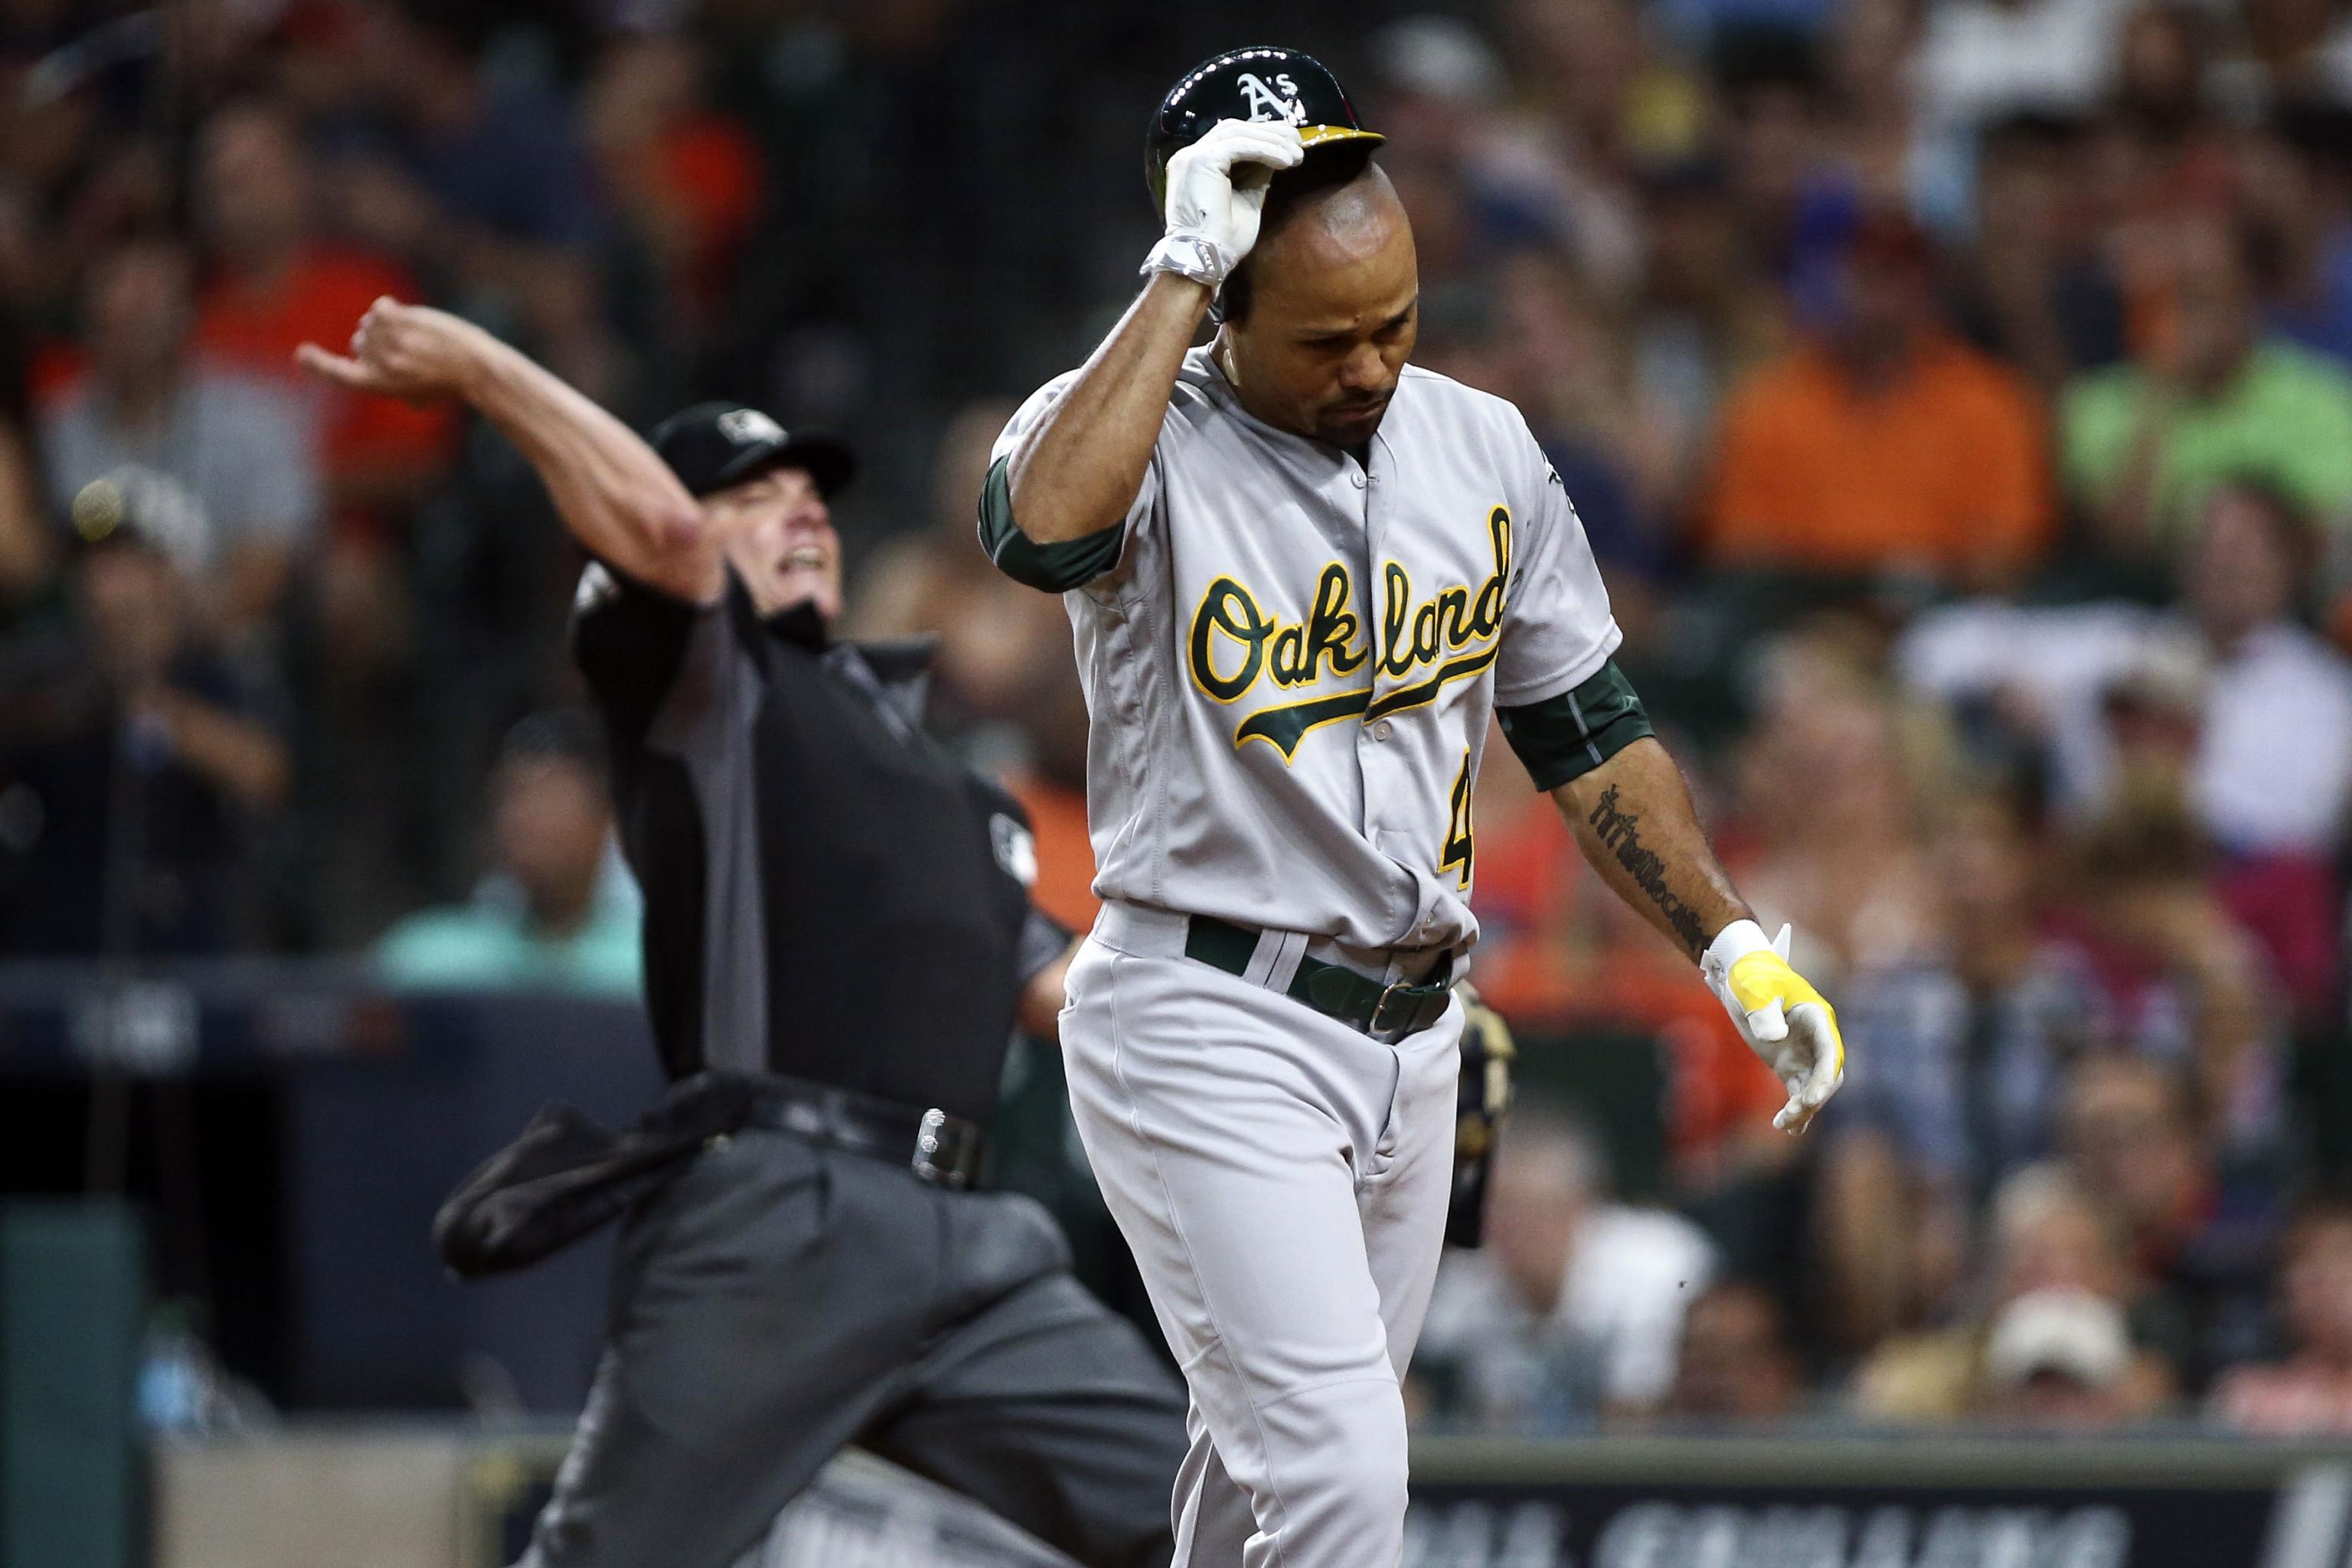 Report: Coco Crisp may return to Oakland A's – East Bay Times